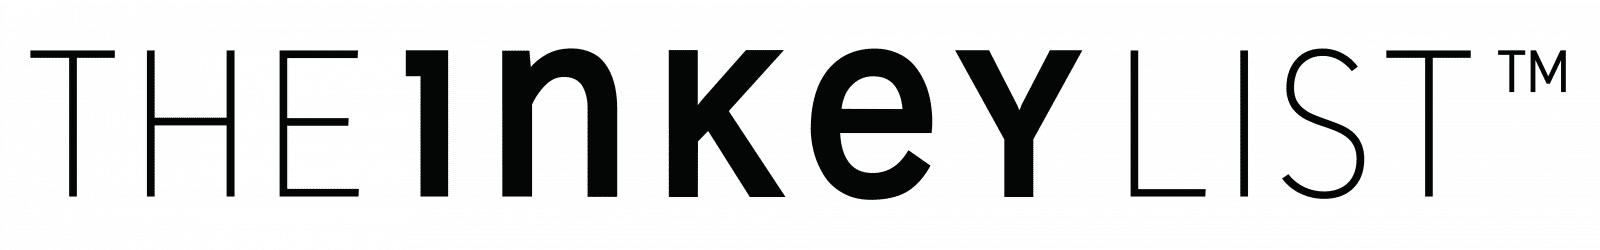 Logo for The Inkey List, Partner of Ashoka UK & Ireland; word "The' is capitalized and in thin black font, directly next to it is the word "INKEY" in bold black capital letters except for the letter n; next to it is the word "List" in the same thin black capitalized font as the word "The"